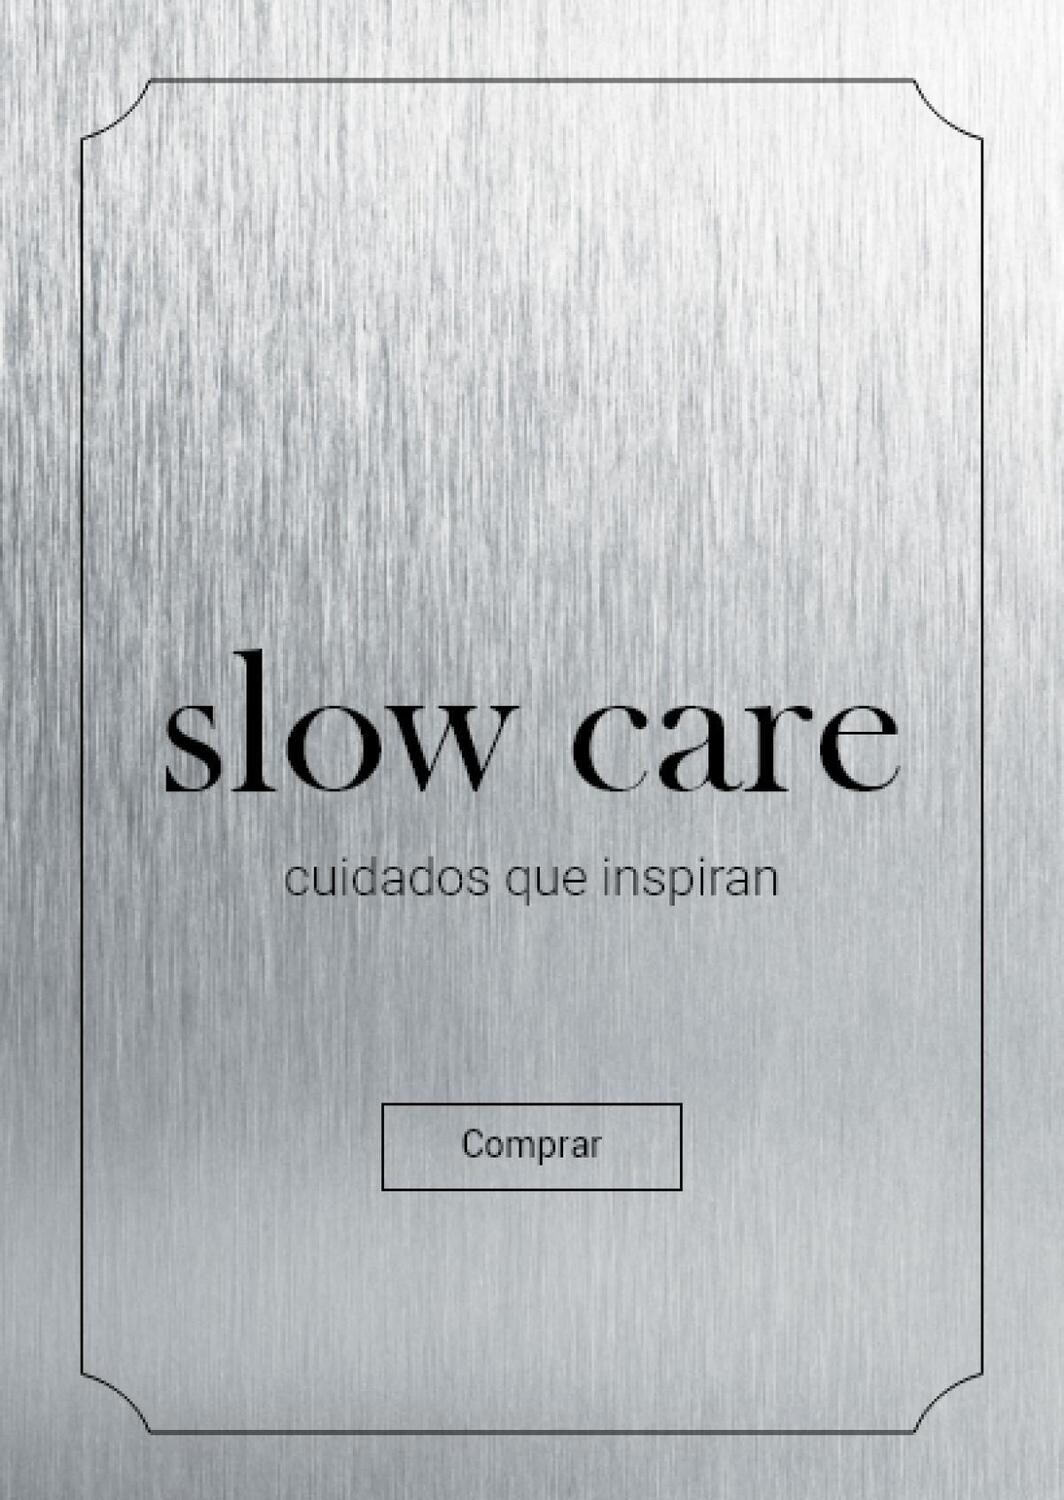 Slow care